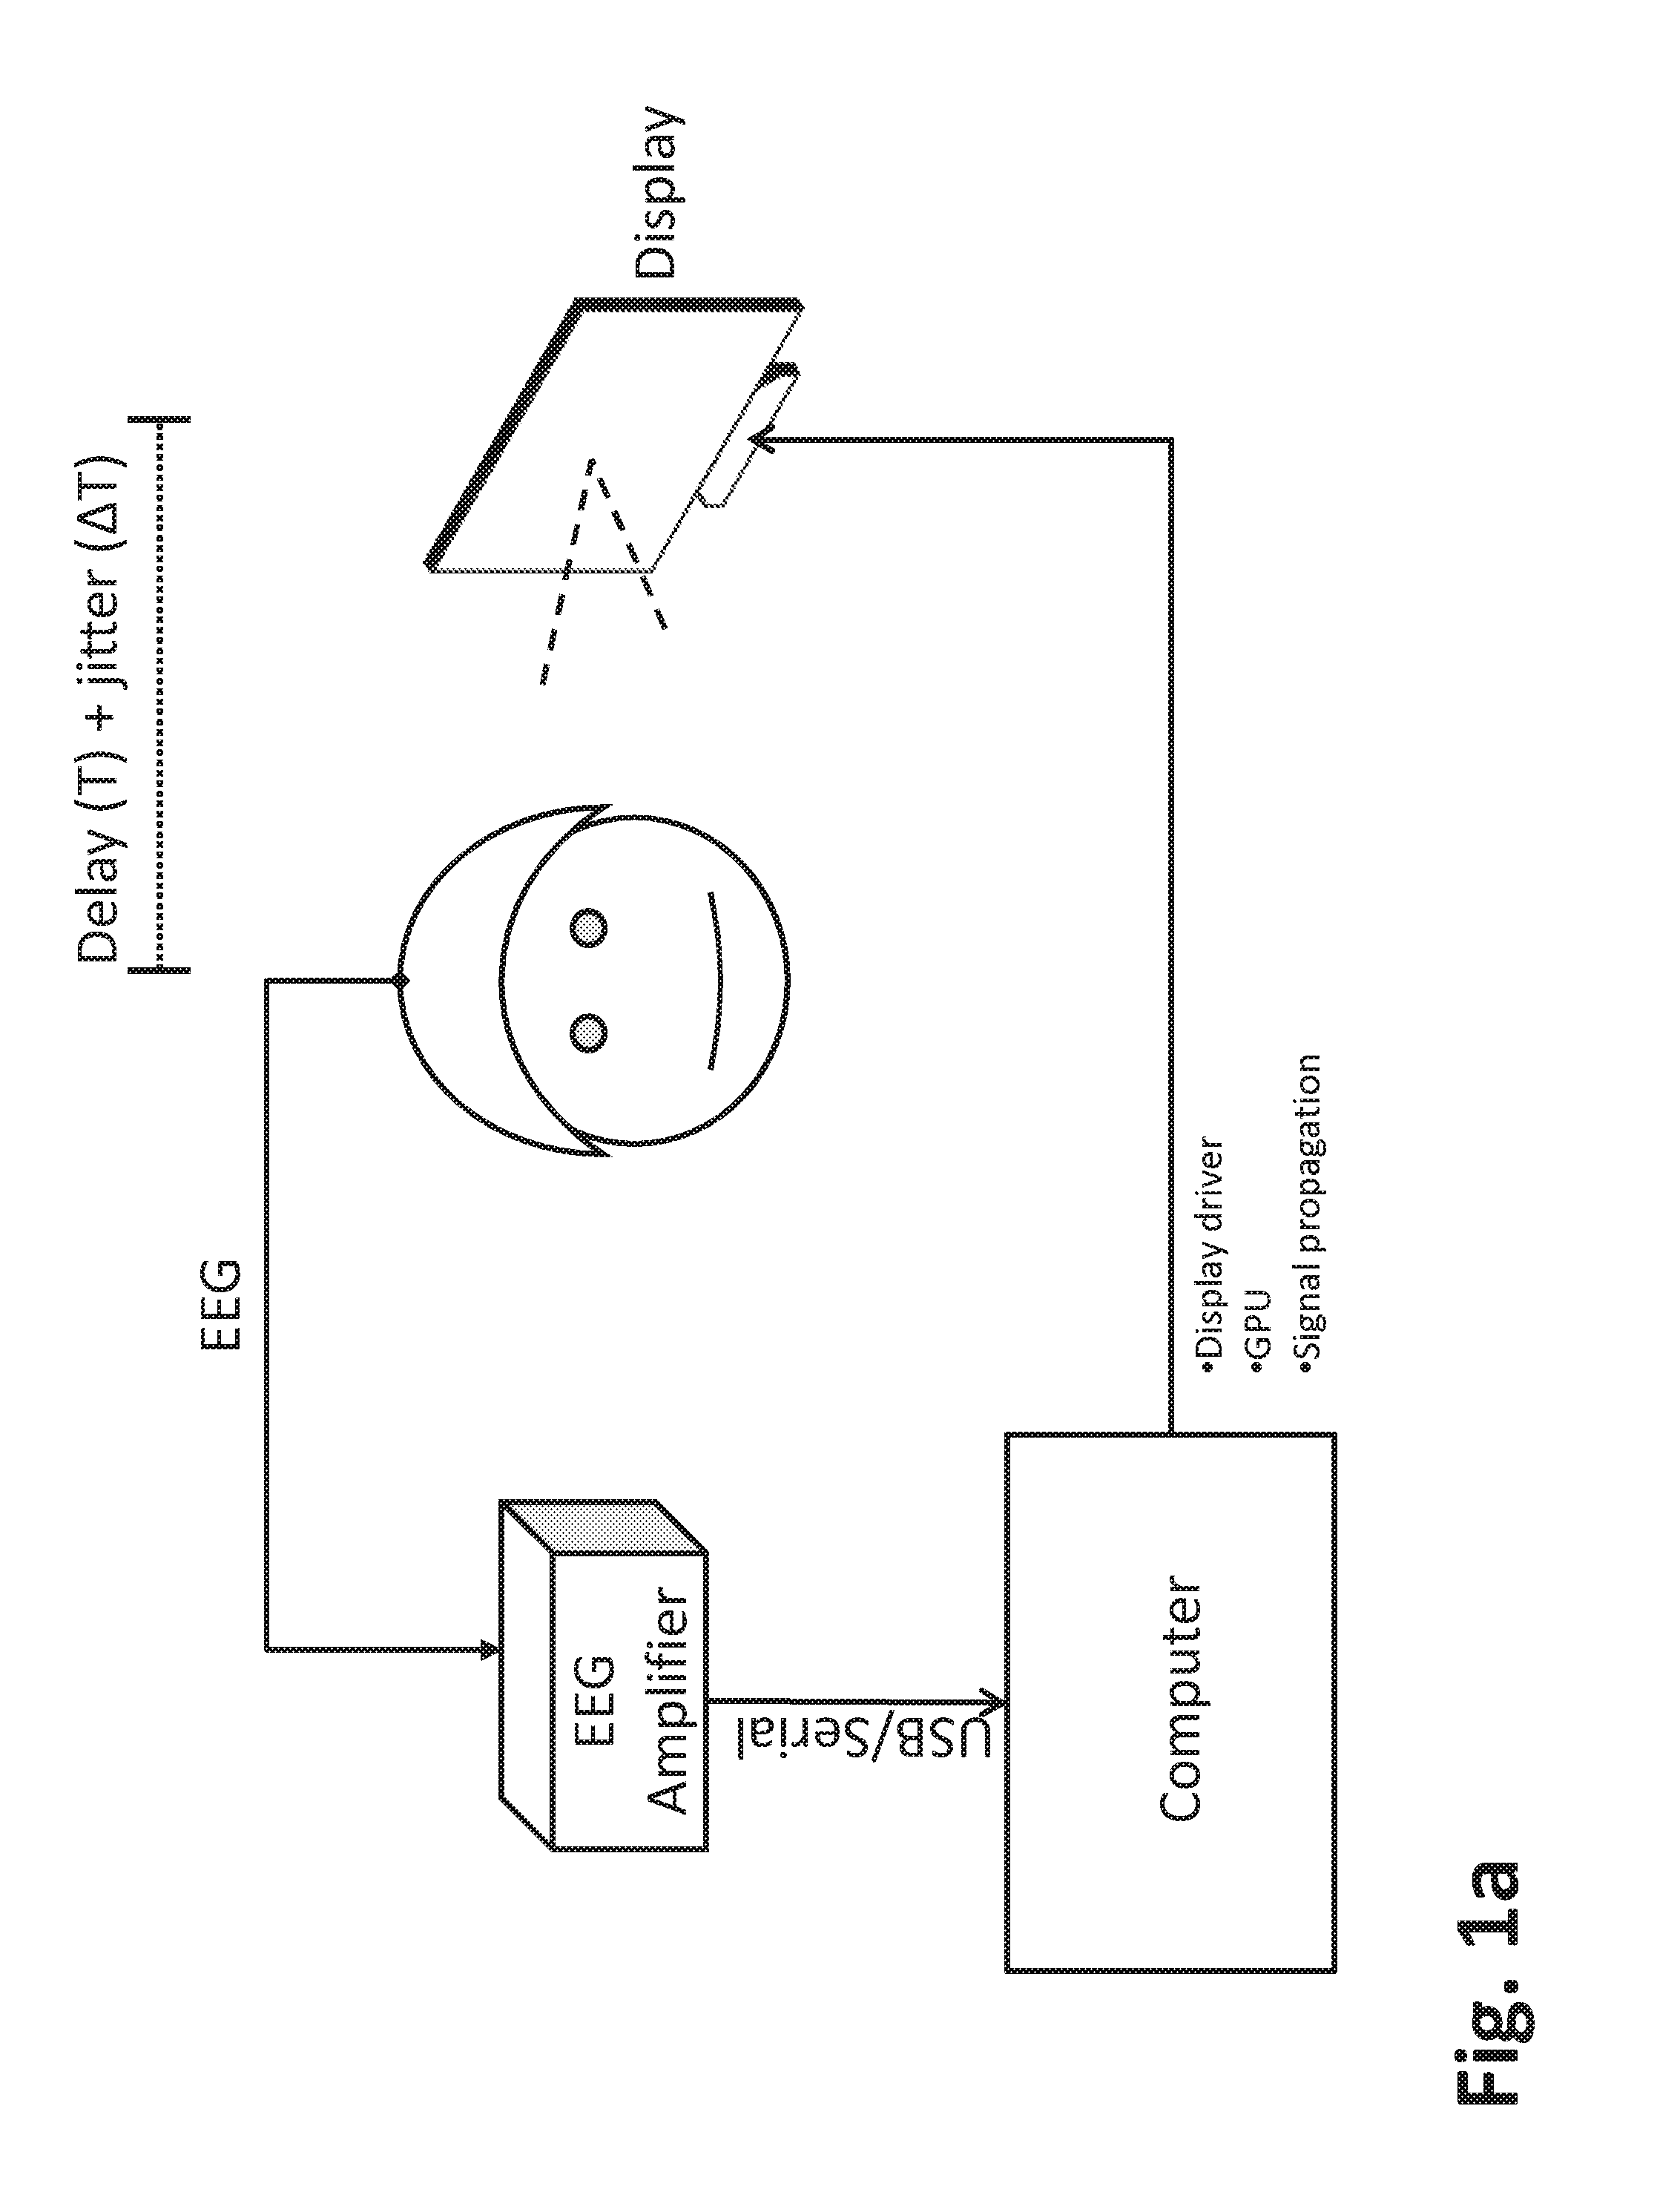 Physiological parameter measurement and feedback system